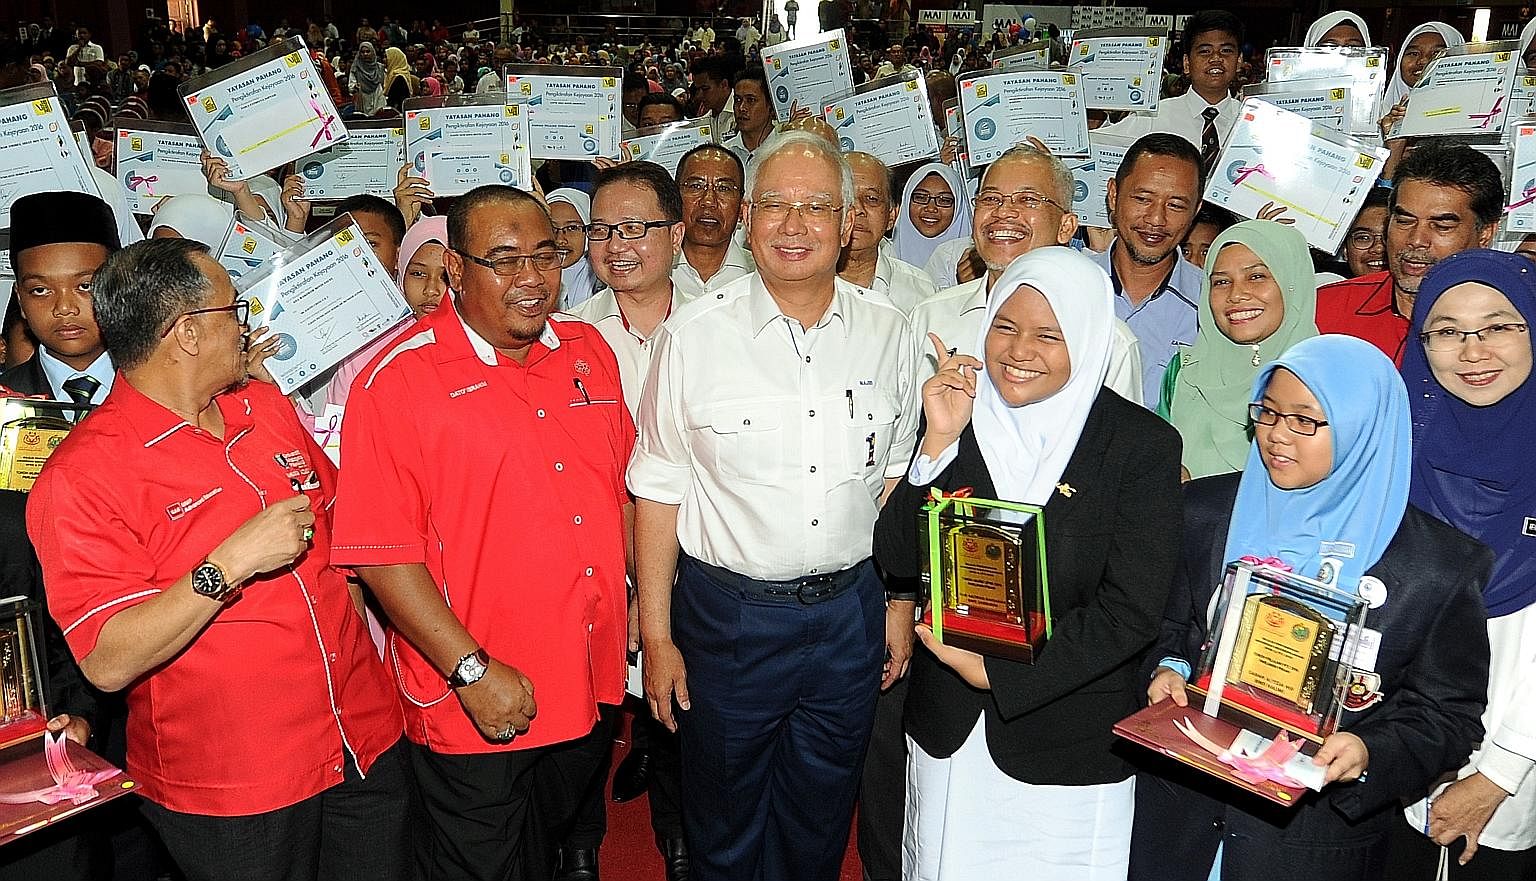 Mr Najib Razak (centre), seen here at an event in Pahang yesterday, criticised his predecessor Mahathir Mohamad for saying the opposition would continue giving cash handouts after criticising the aid programme earlier.